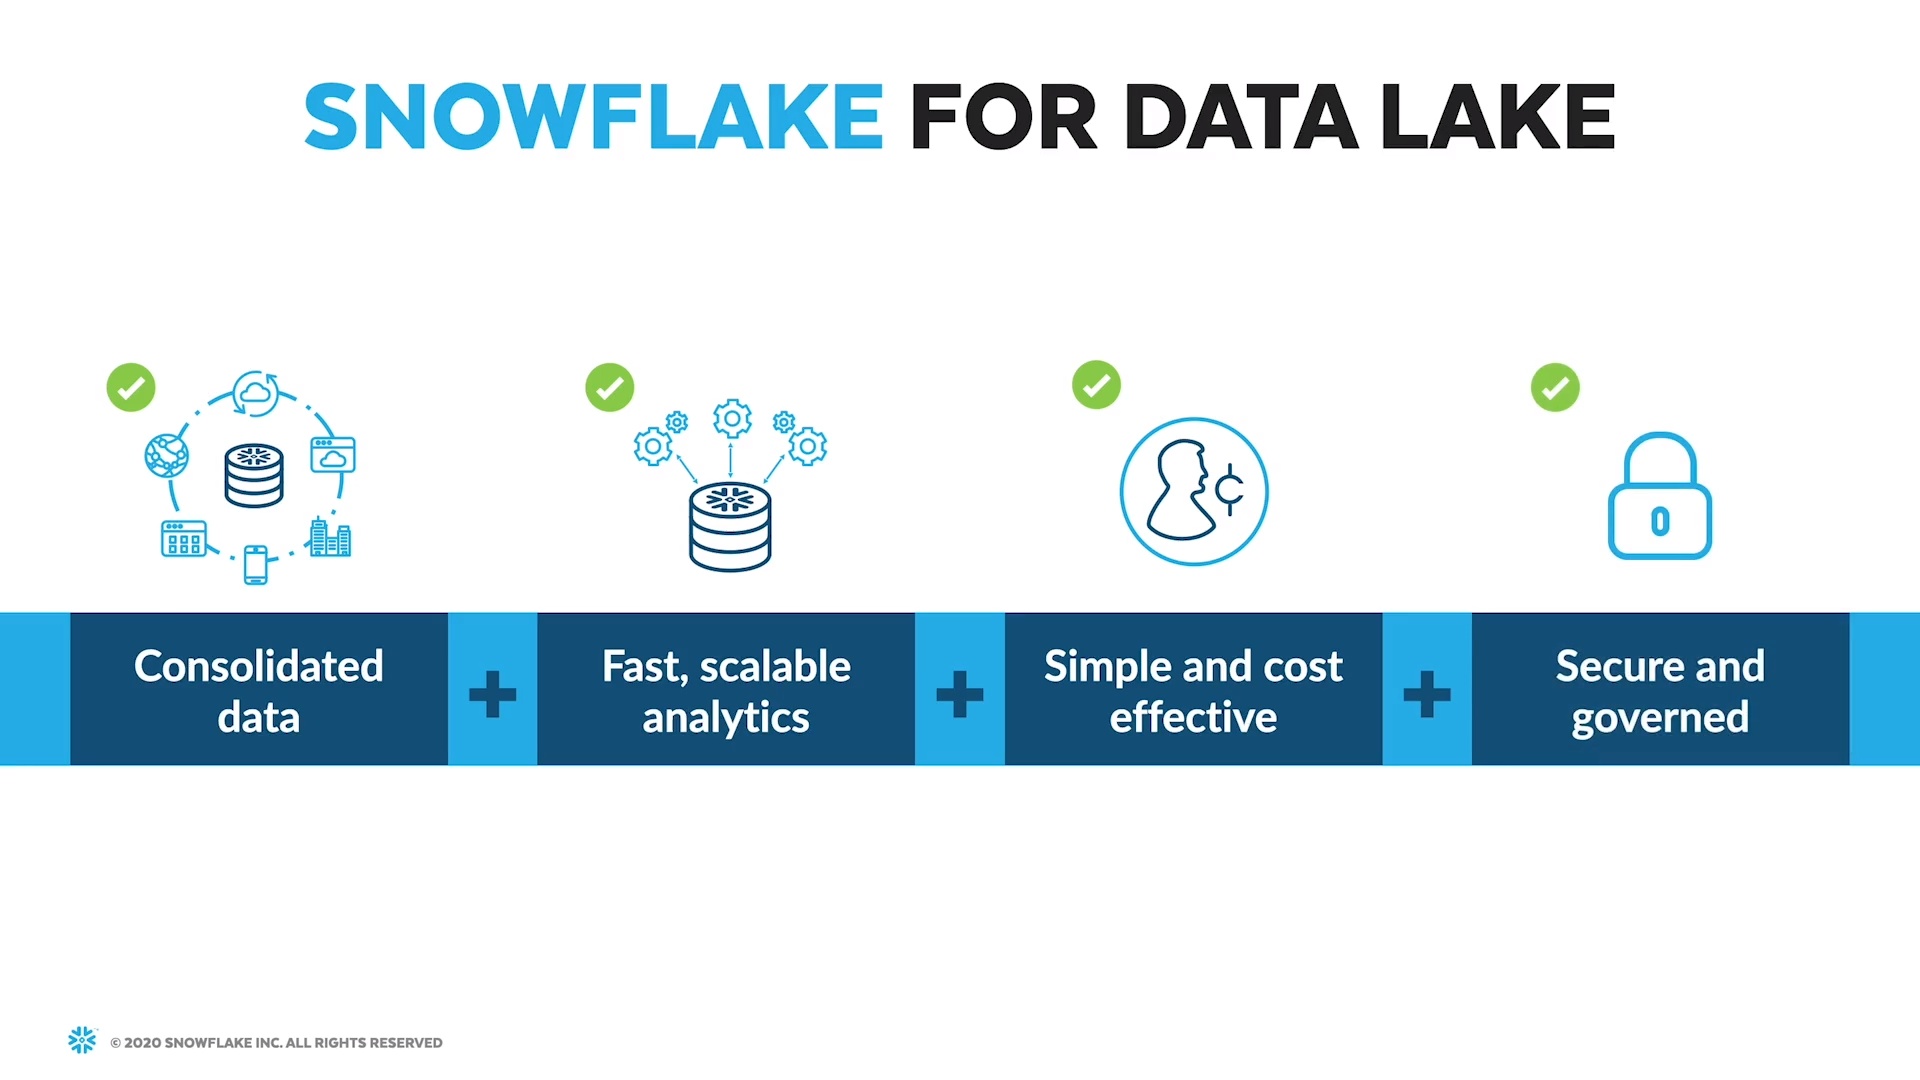 Enhancing Data Access And Performance With Snowflake Data Lake